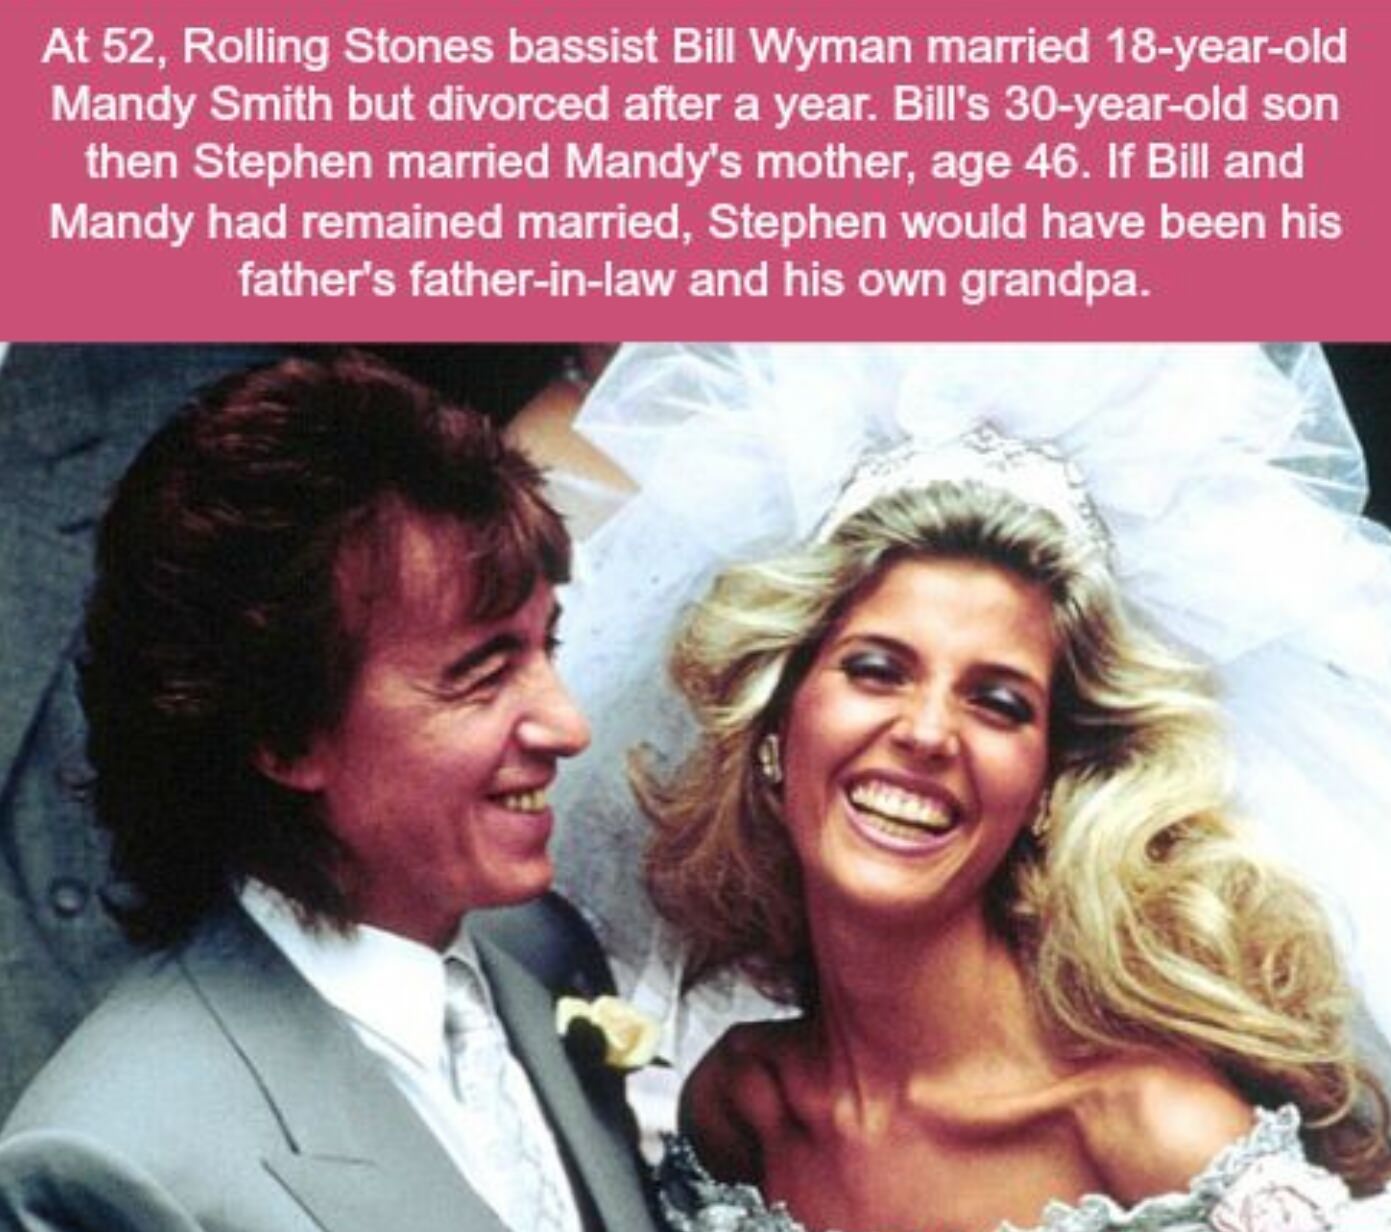 bill wyman - At 52, Rolling Stones bassist Bill Wyman married 18yearold Mandy Smith but divorced after a year. Bill's 30yearold son then Stephen married Mandy's mother, age 46. If Bill and Mandy had remained married, Stephen would have been his father's f